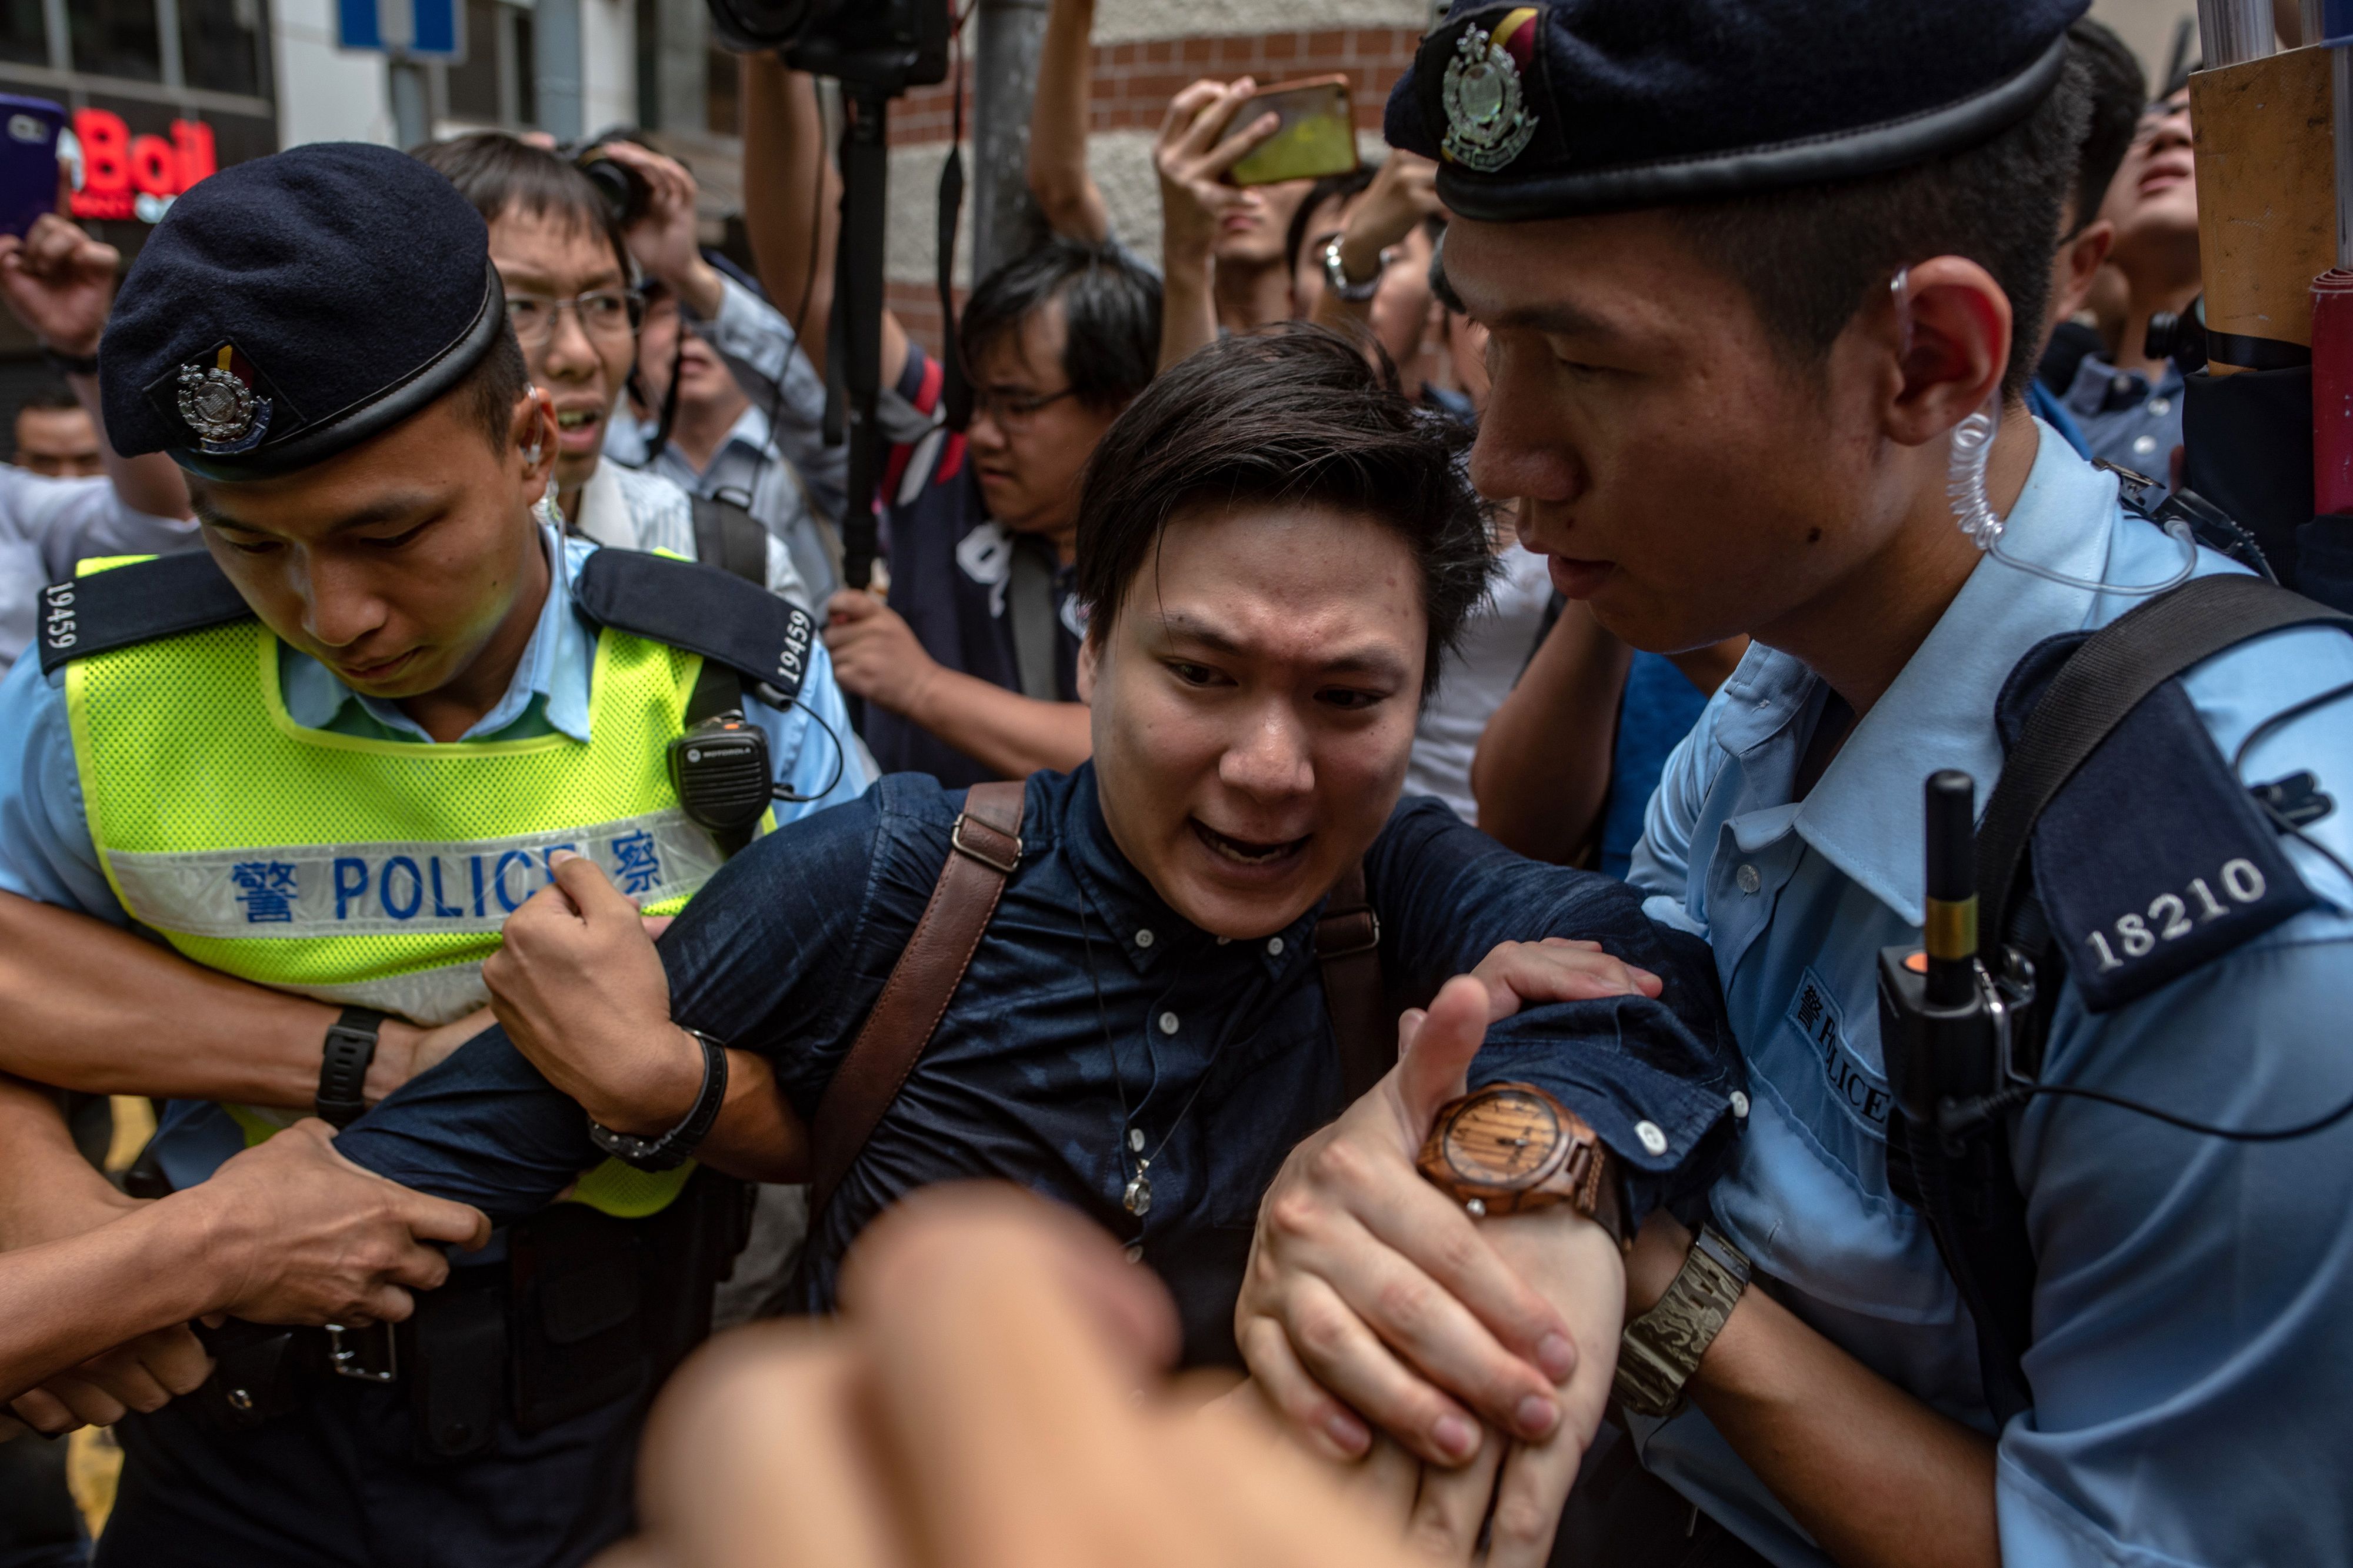 Pro-independence activist Wayne Chan is evicted by police from a location outside the Foreign Correspondents' Club (FCC), as people protest ahead of a speech by pro-independence activist Andy Chan, in Hong Kong on August 14, 2018. (Philip Fong—AFP/Getty Images)